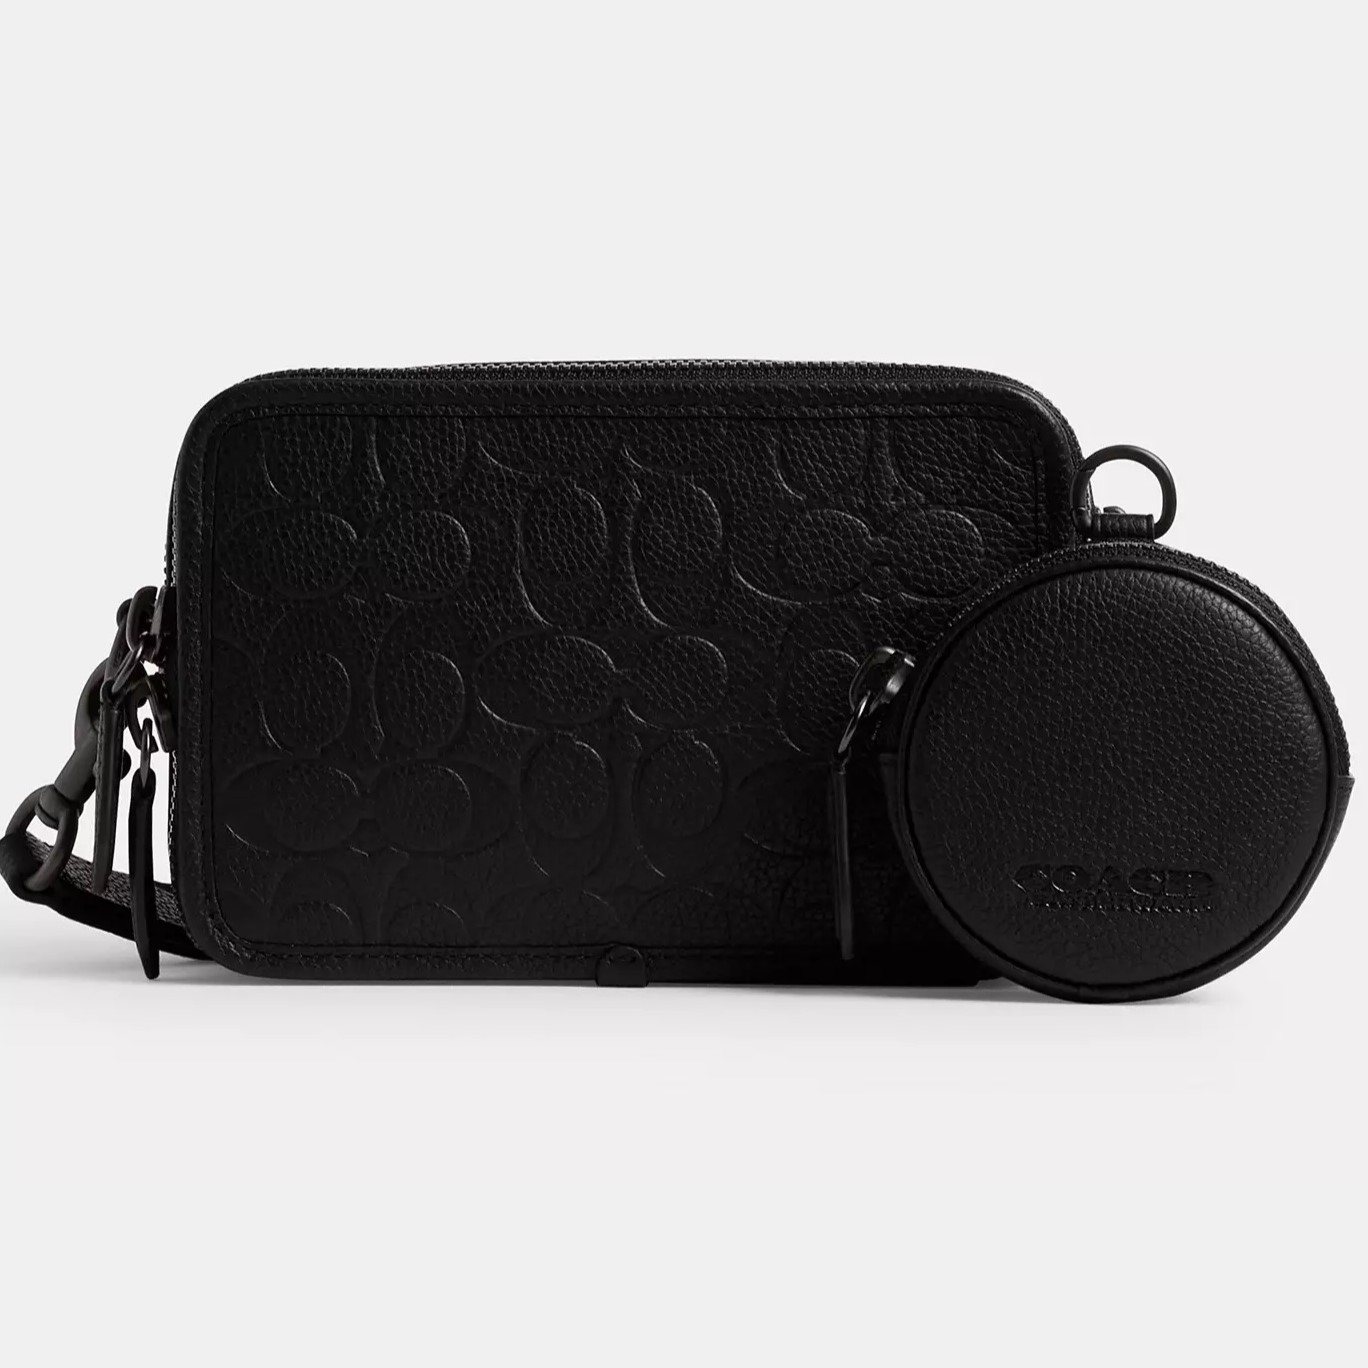 TÚI ĐEO CHÉO COACH NAM CHARTER CROSSBODY WITH HYBRID POUCH IN BLACK SIGNATURE LEATHER CP268 4